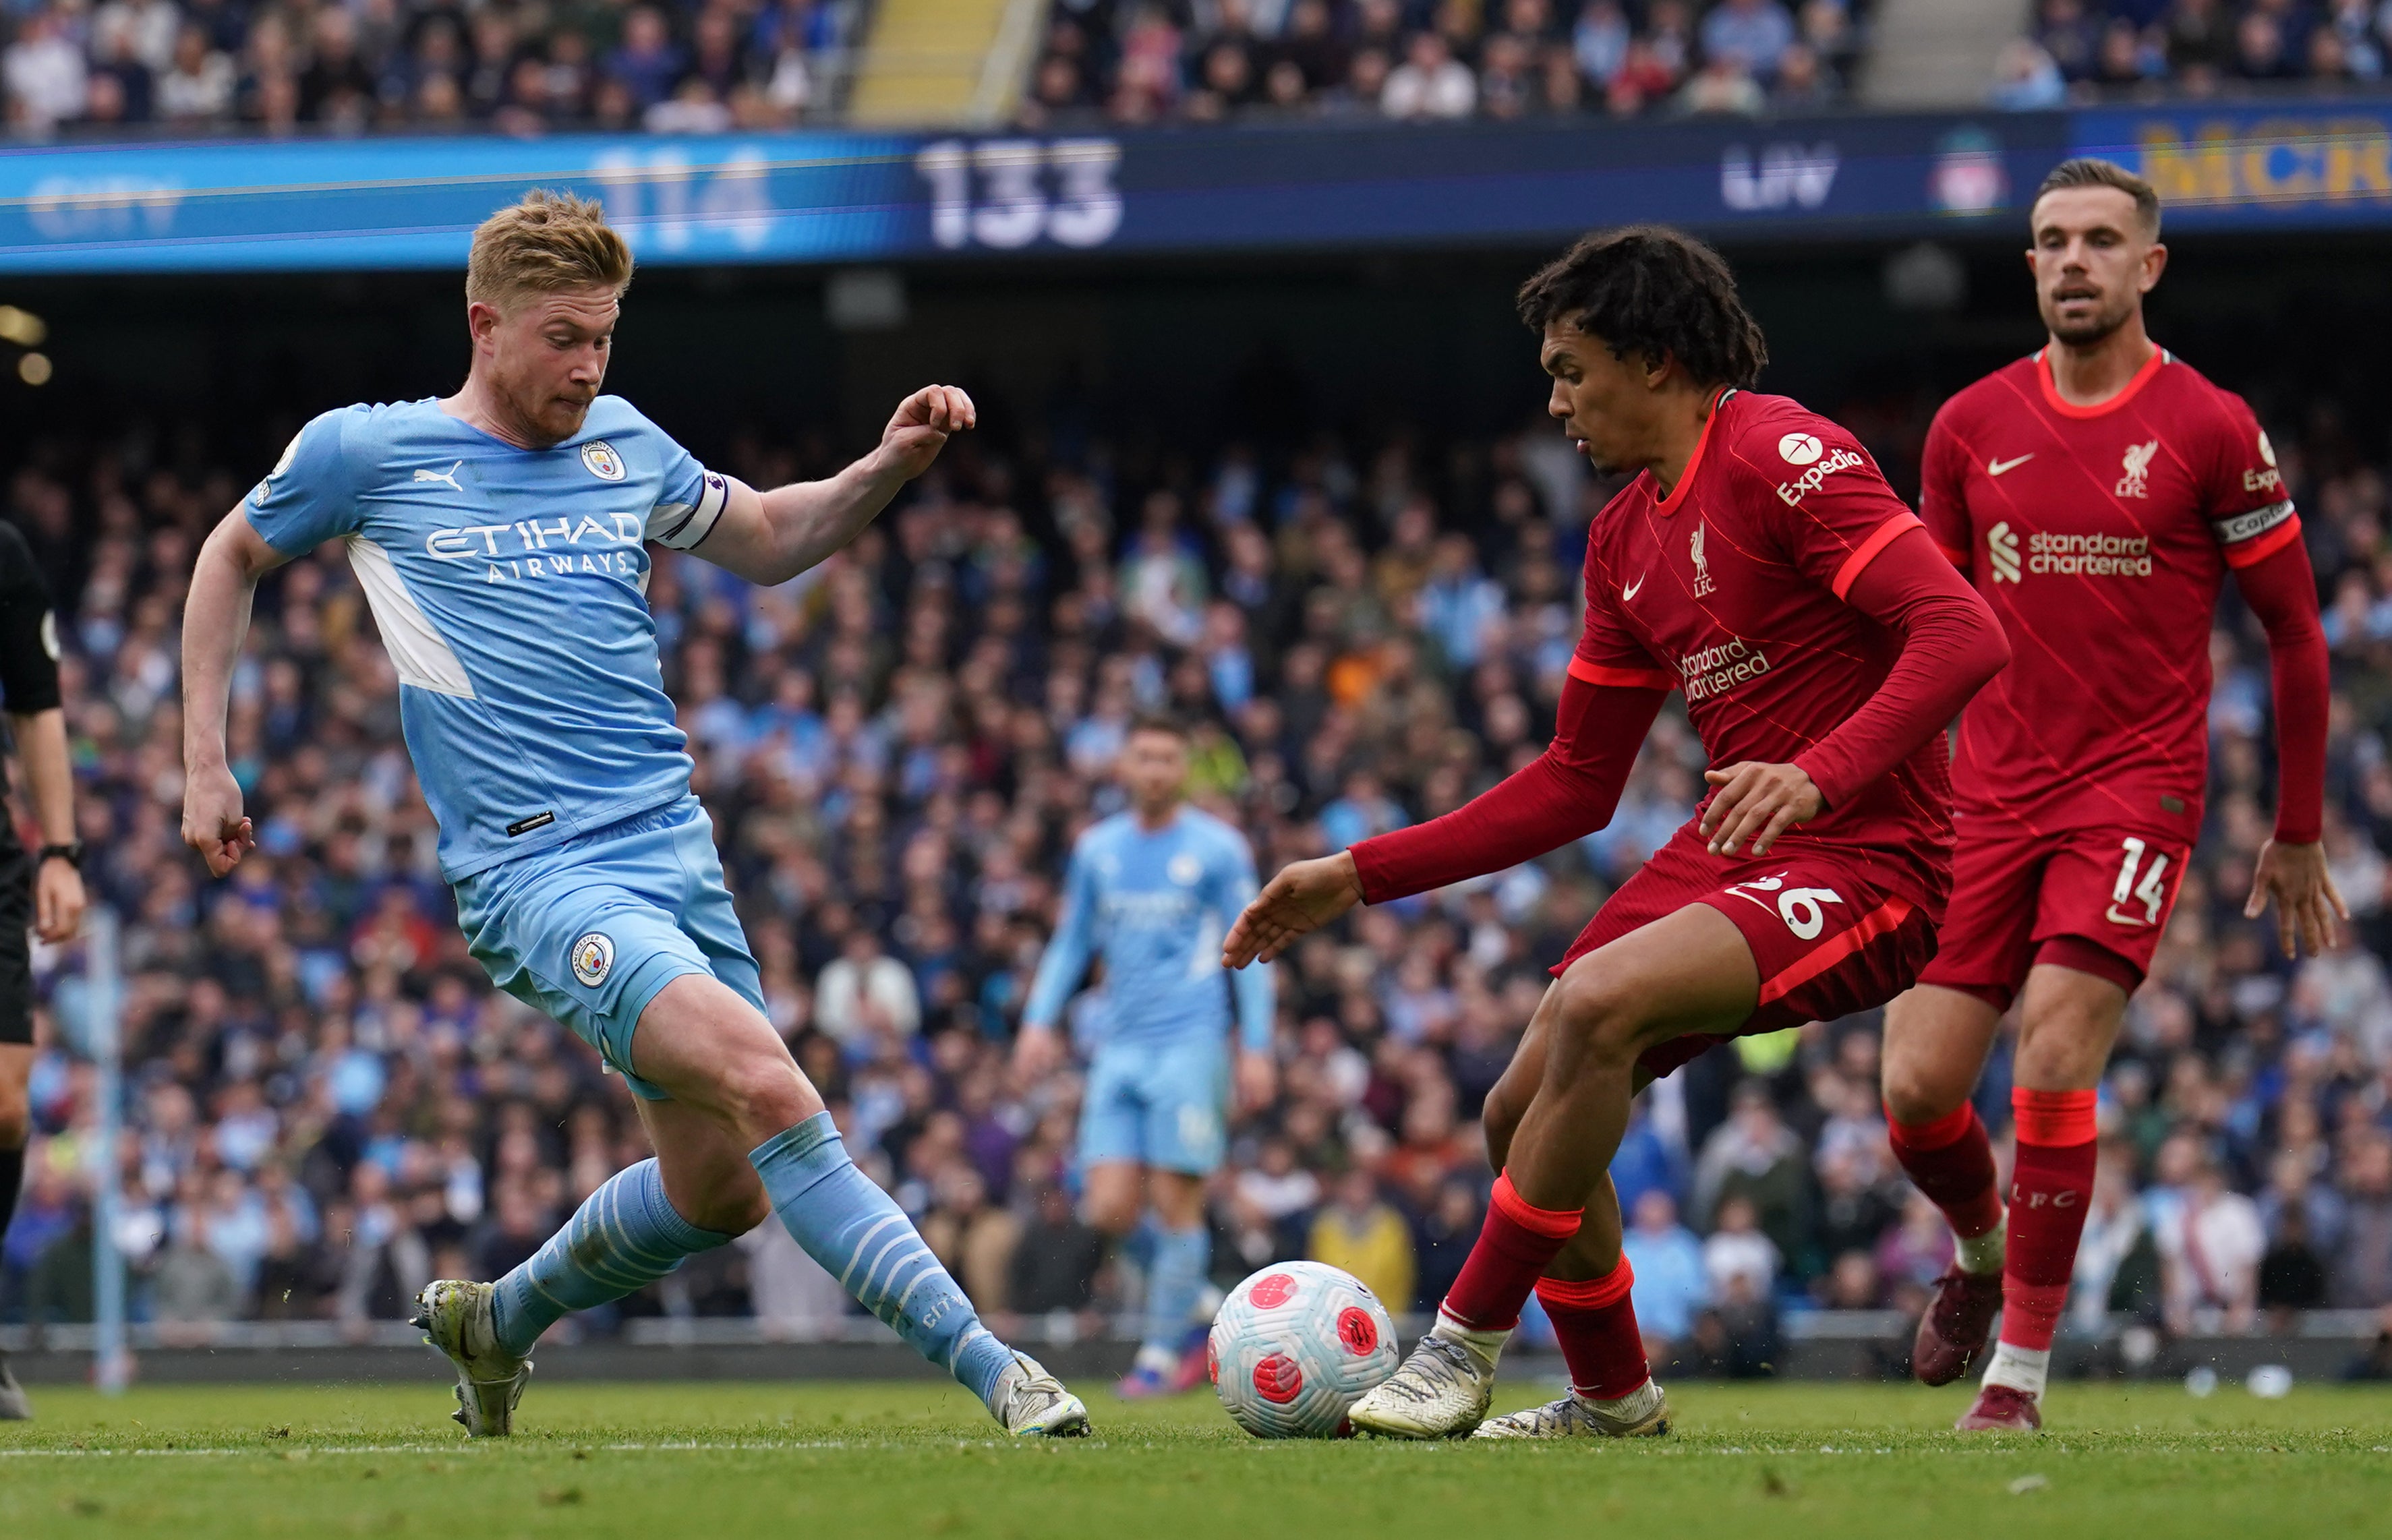 Manchester City and Liverpool meet again on Saturday